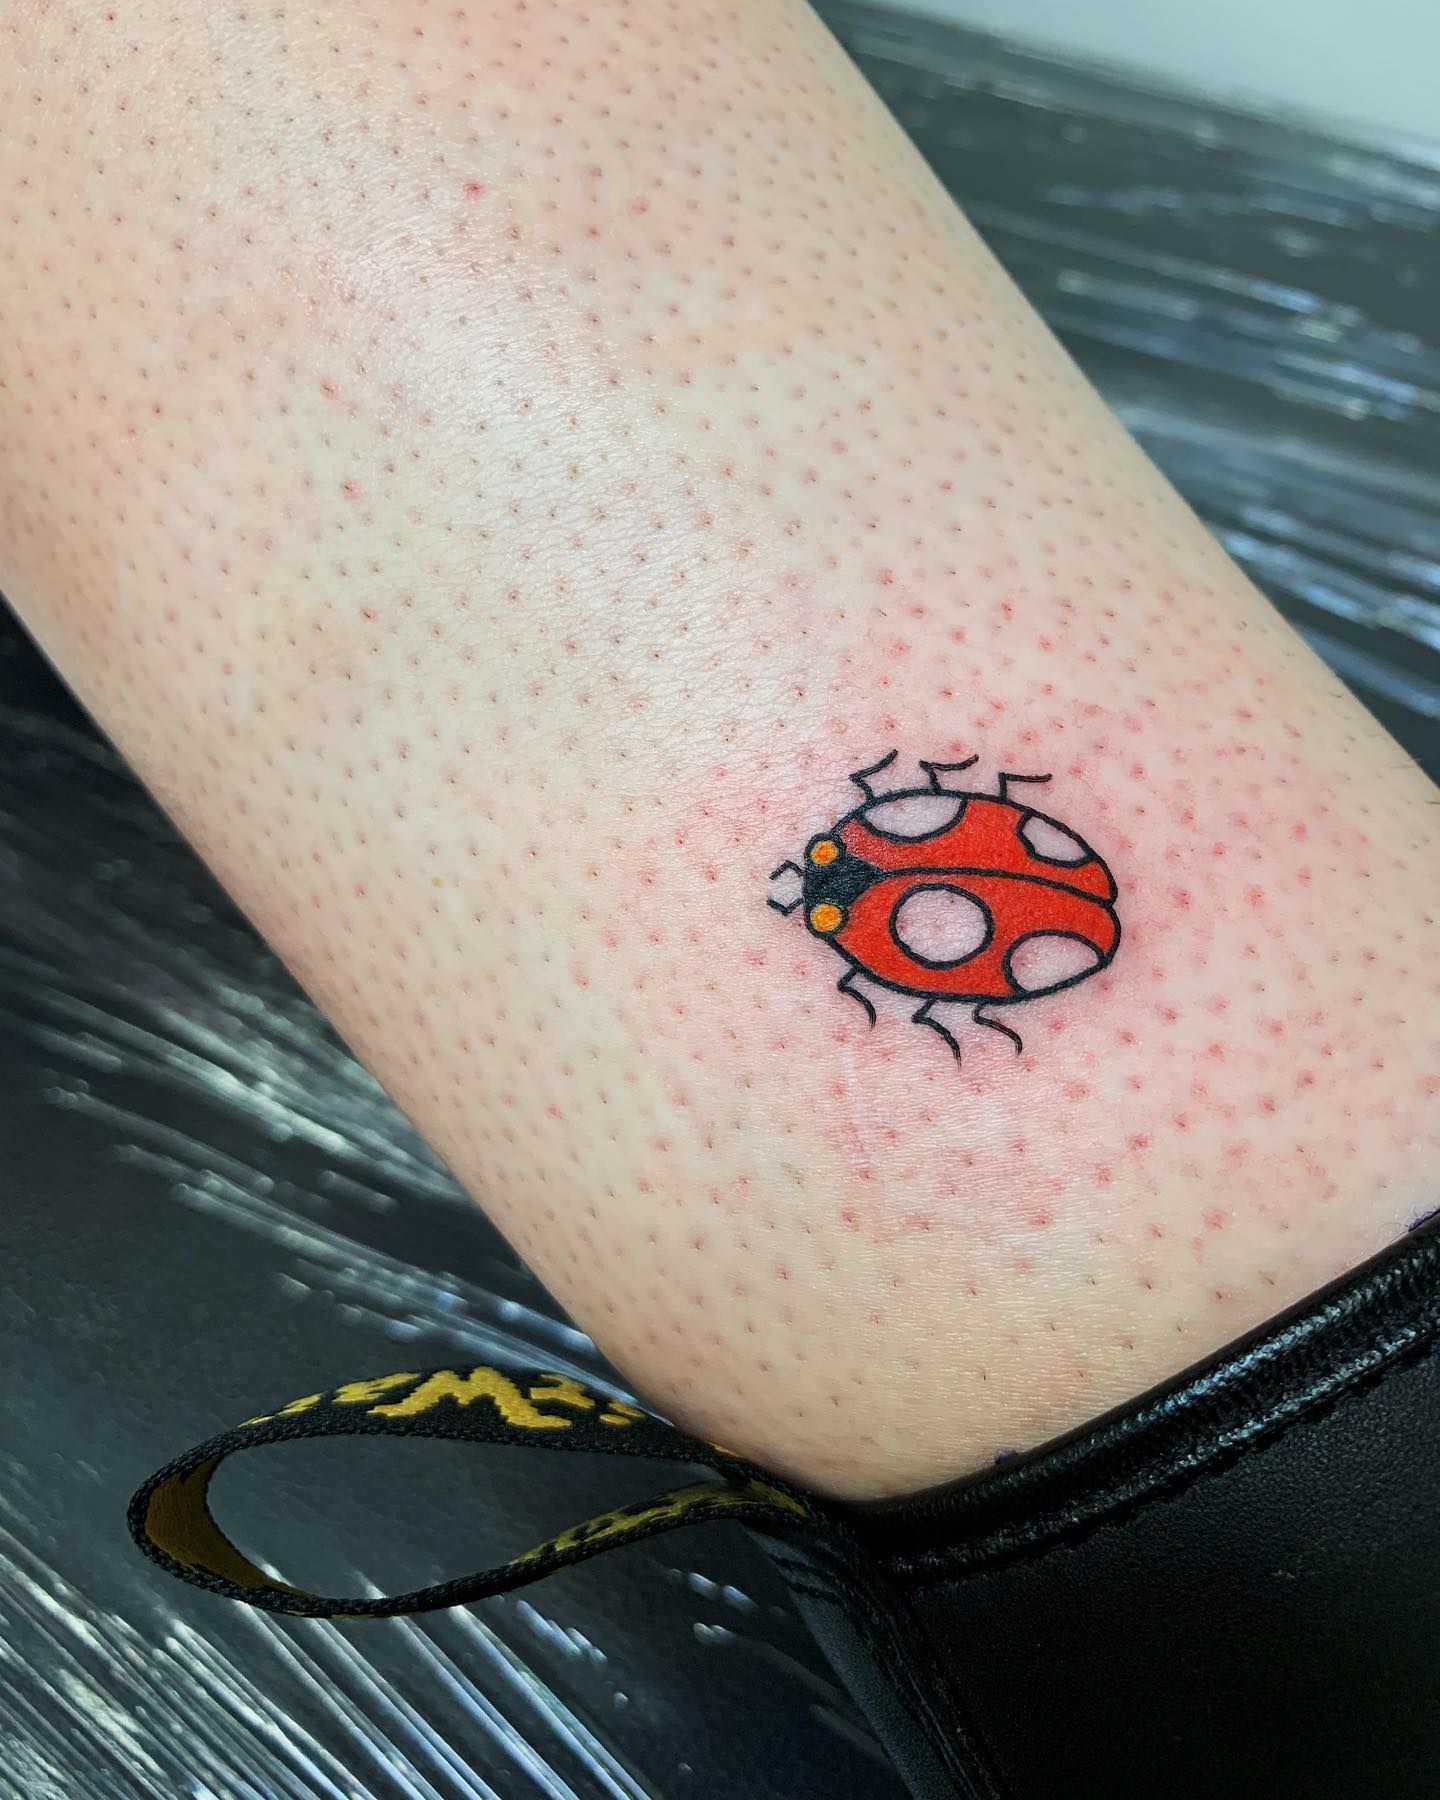 Ladybug and butterfly tattooed on the inner forearm